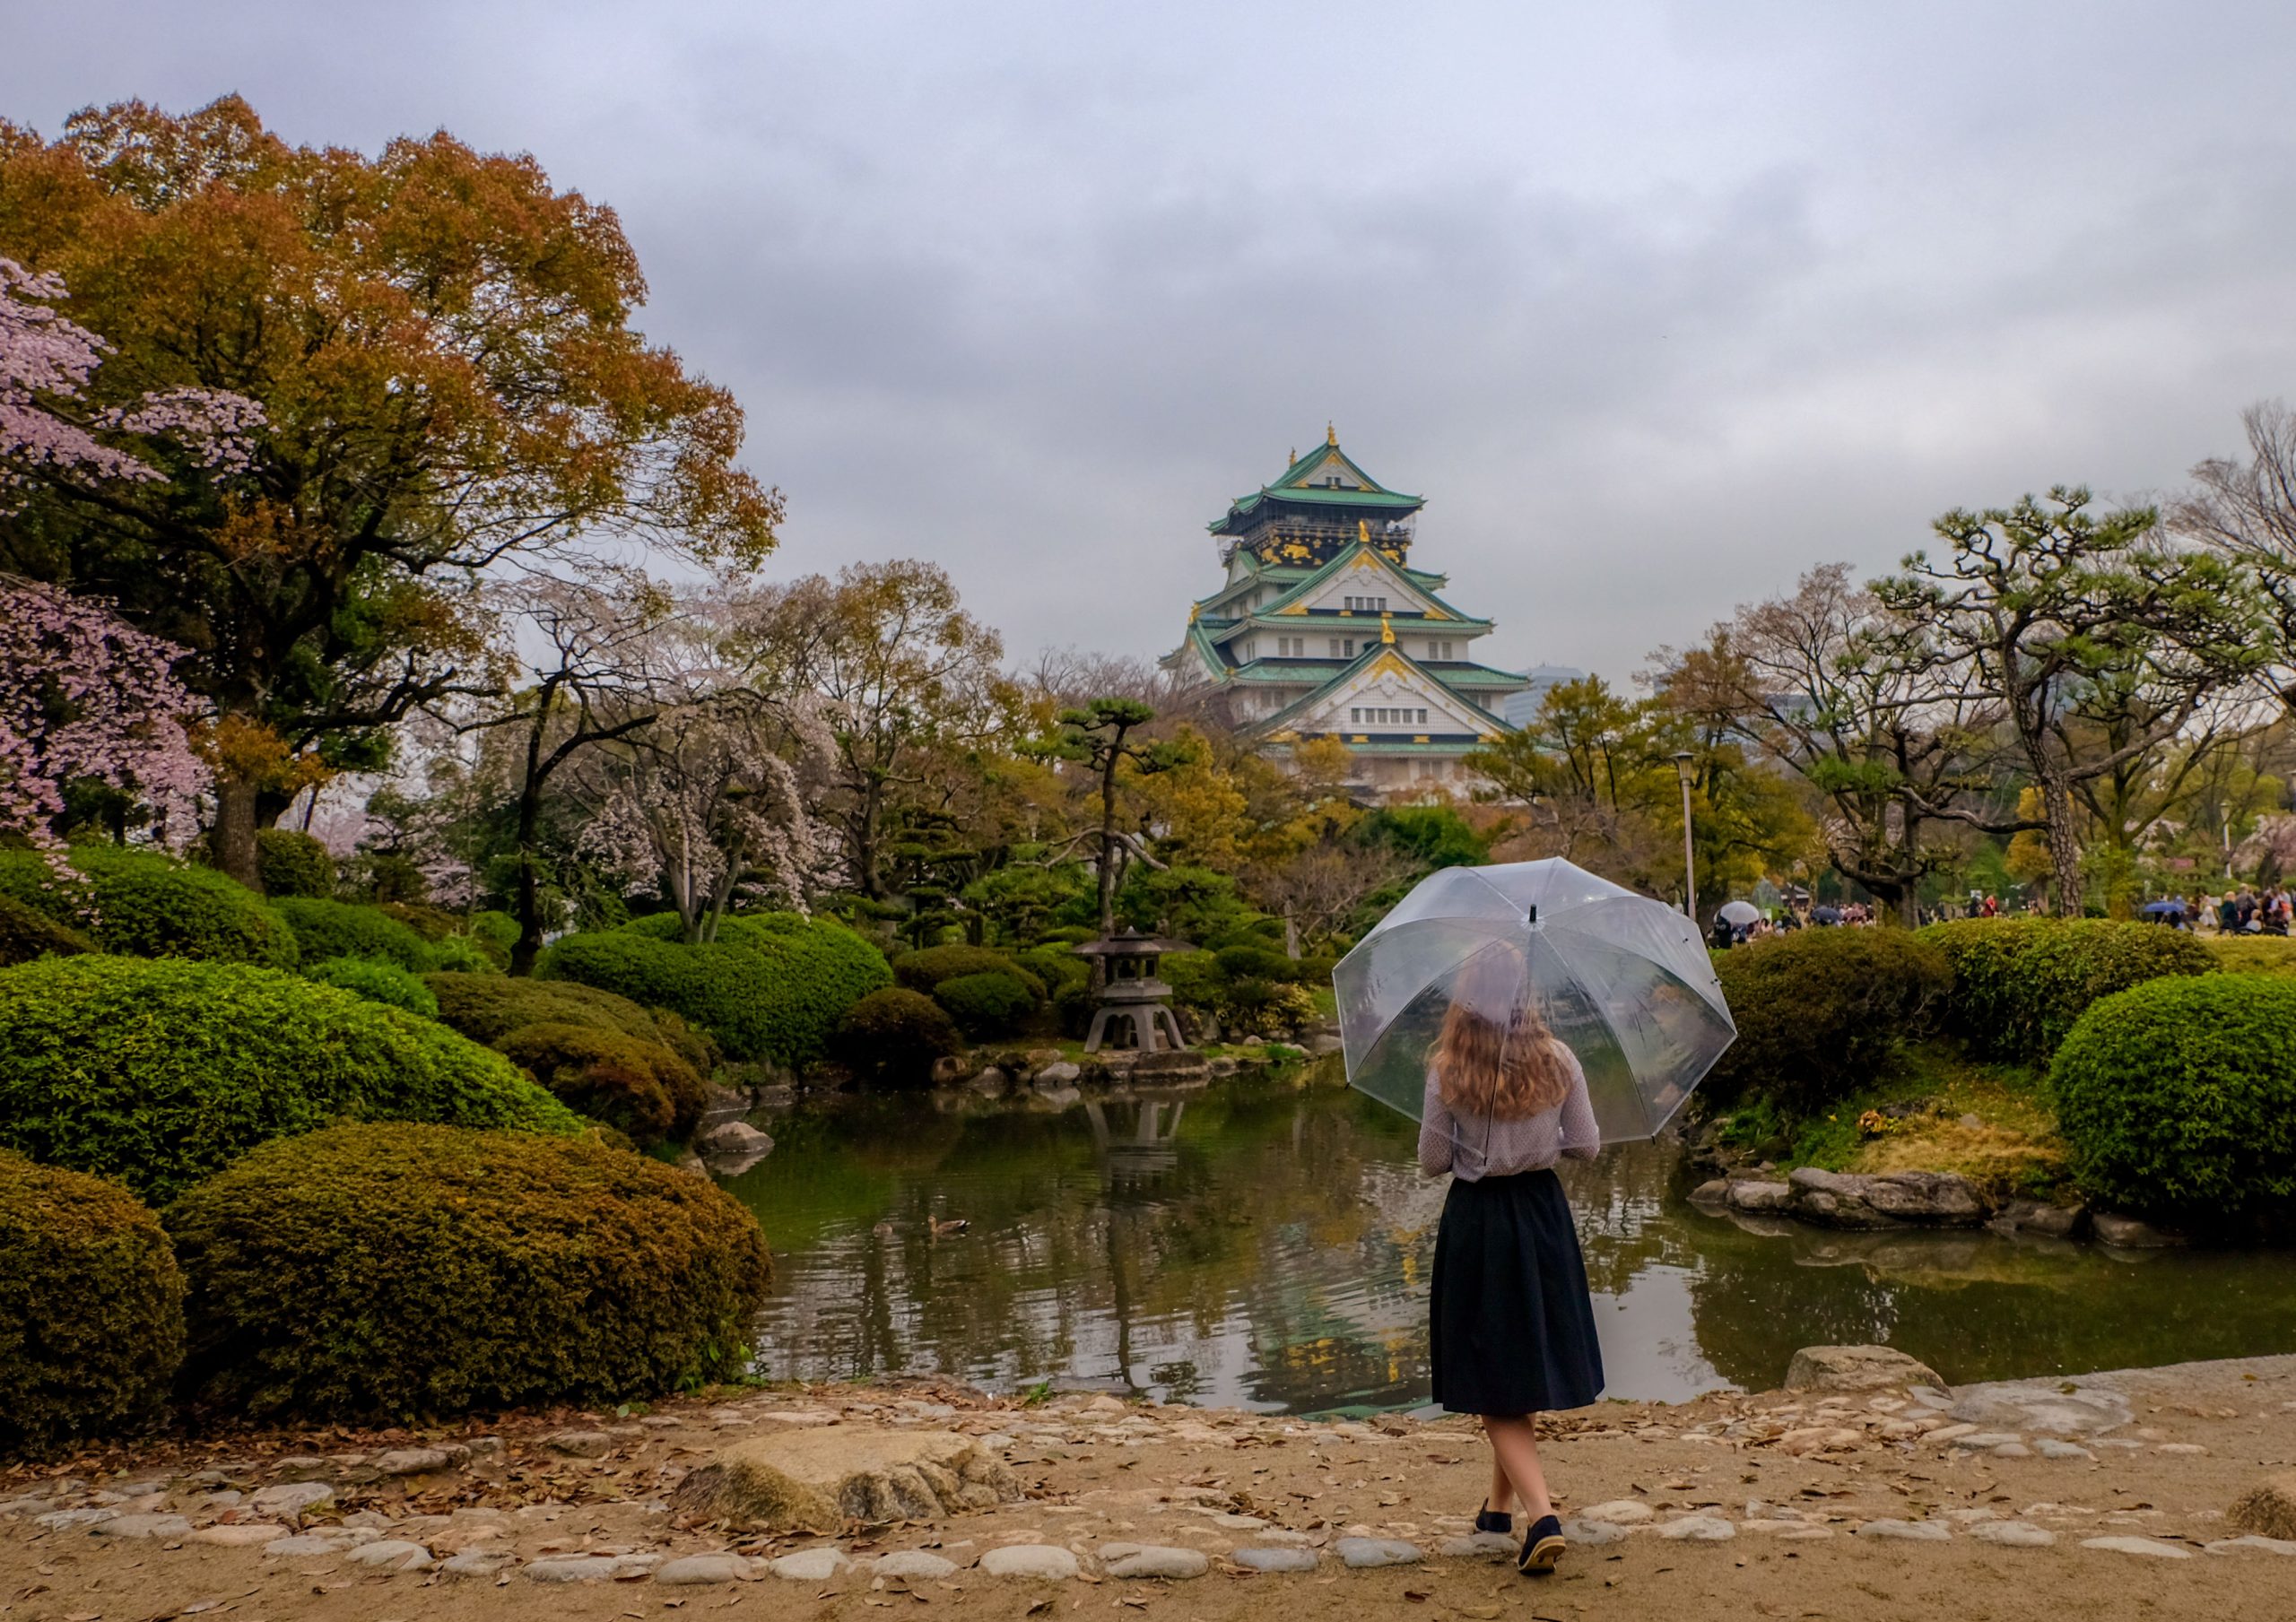 One of the best things to do in Osaka is seeing the superb Osaka Castle